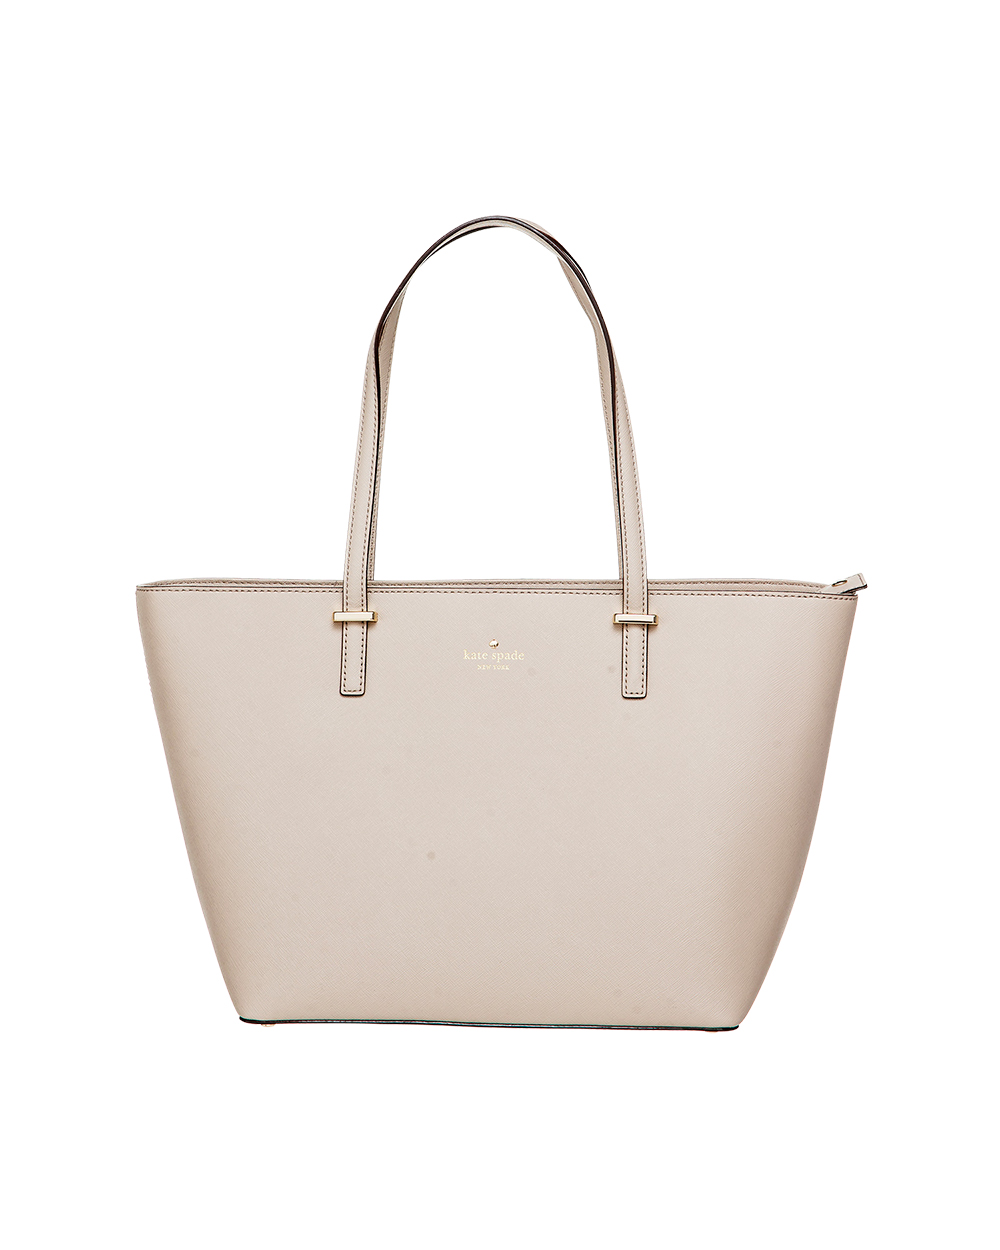 Kate Spade bag, $525, from T by DFS Galleria